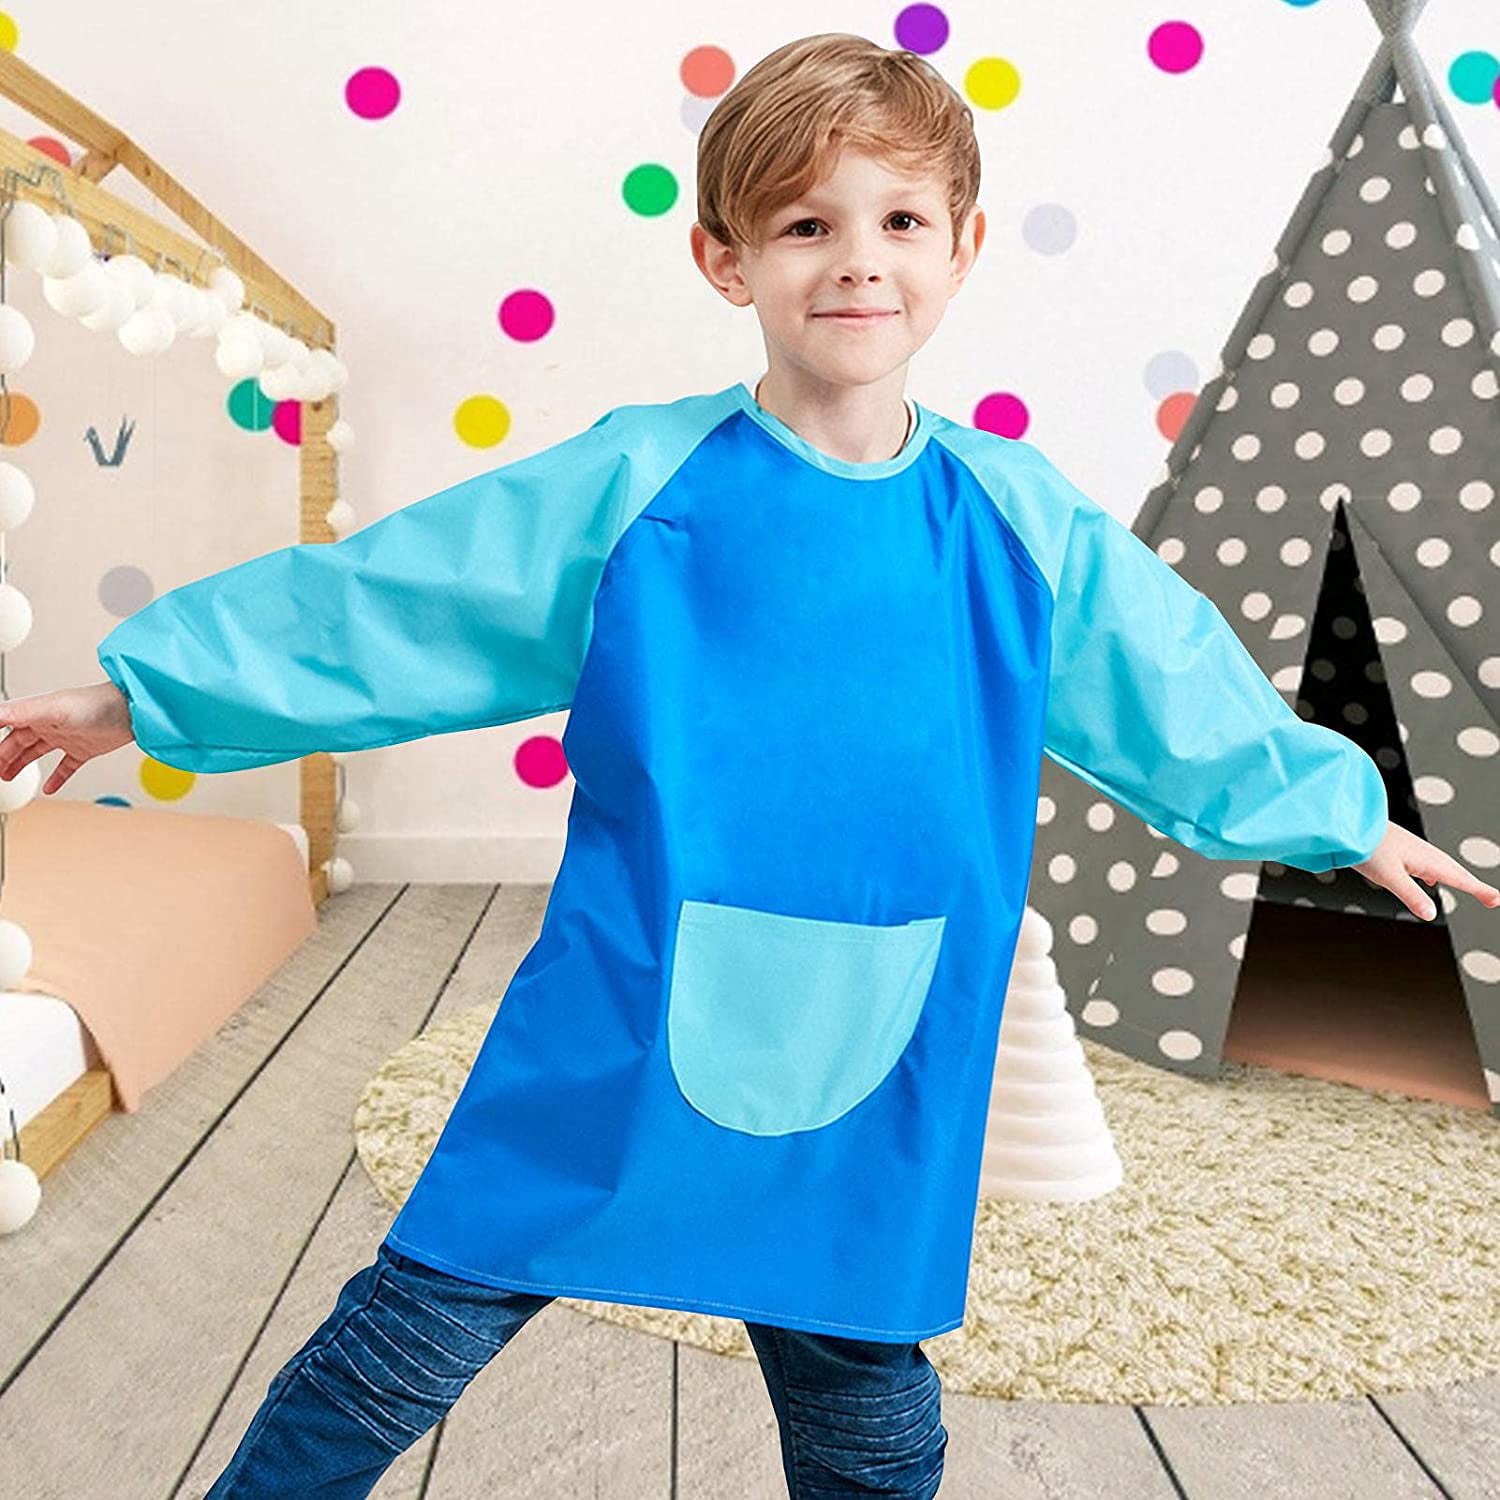 Kids Cooking Apron Craft Coat with Big Pockets Easy to Clean Children Art Smock for Aged 7-11 Water-Proof Kids Play Art Smock Children Painting Apron 